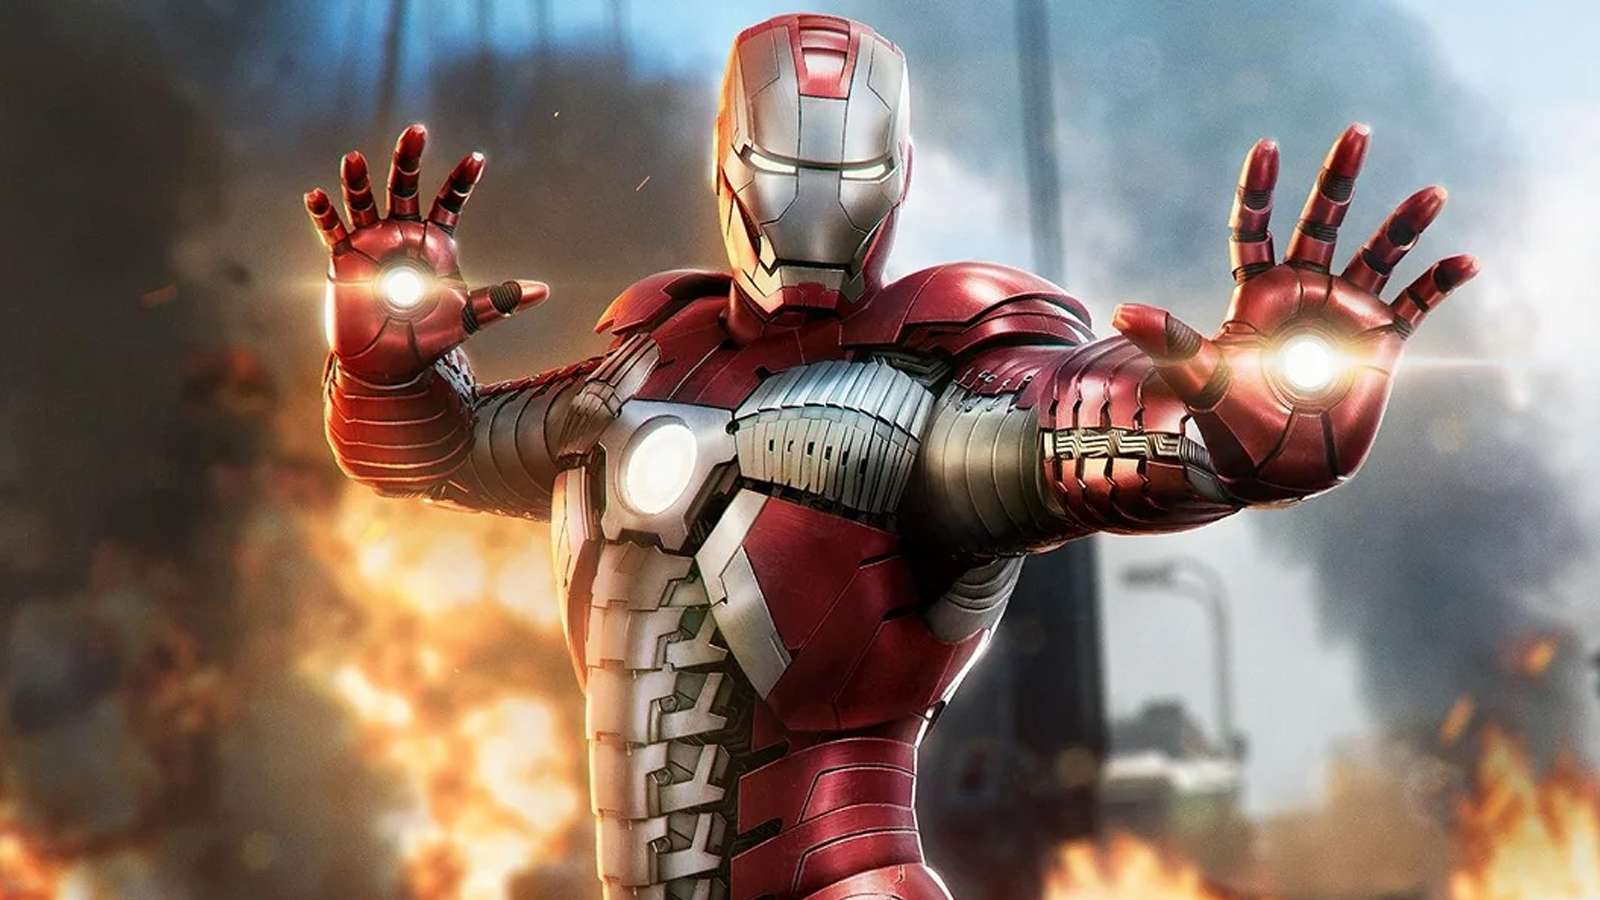 An image of Iron Man in Marvel's Avengers